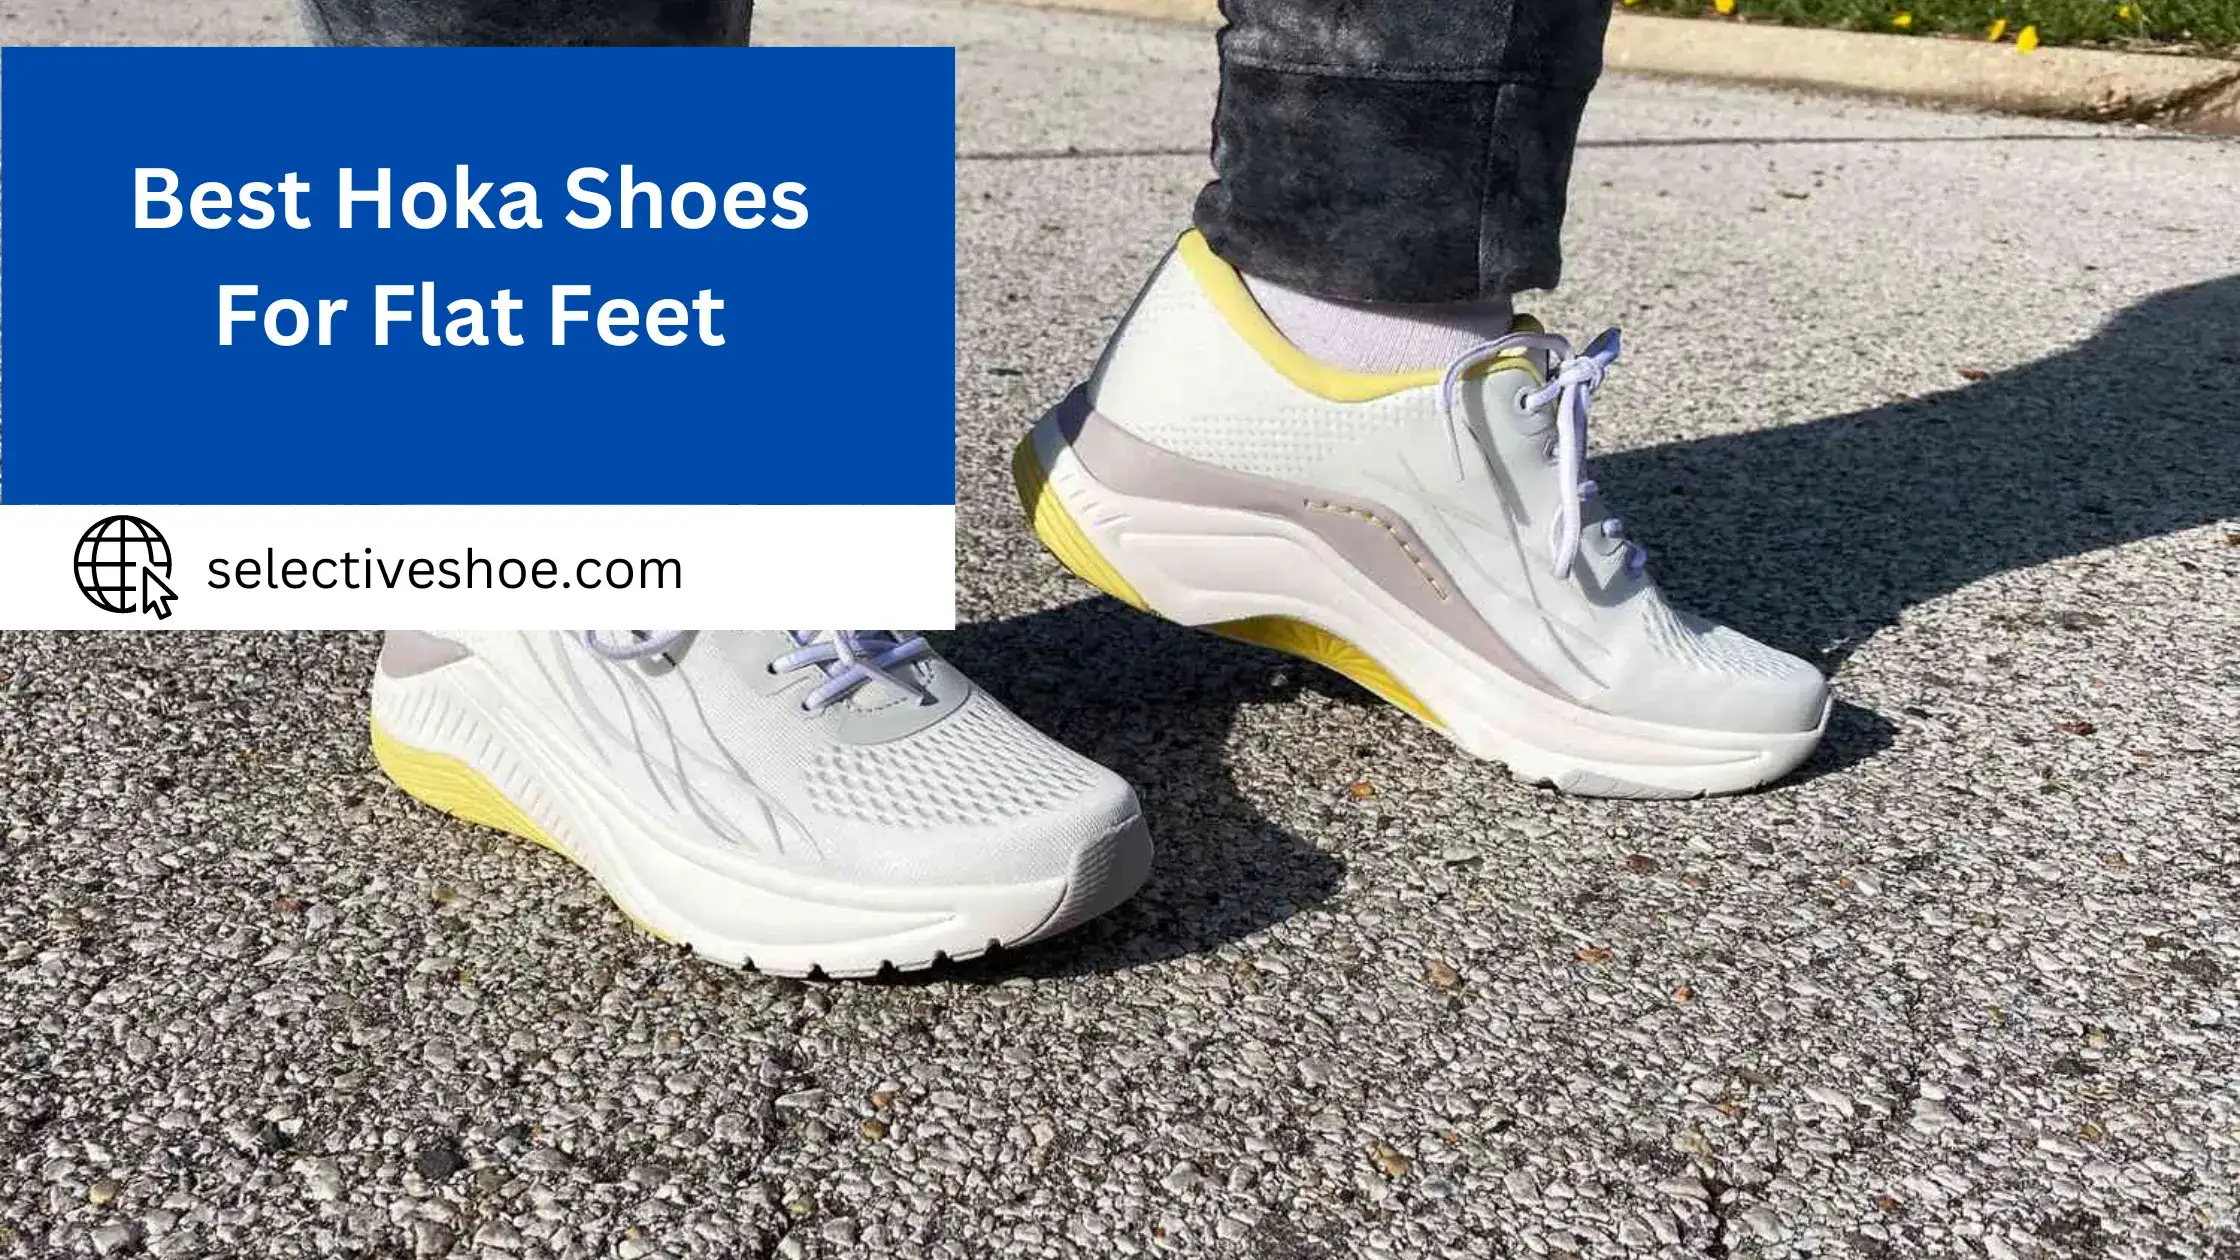 Best Hoka Shoes For Flat Feet - (An In-Depth Guide)